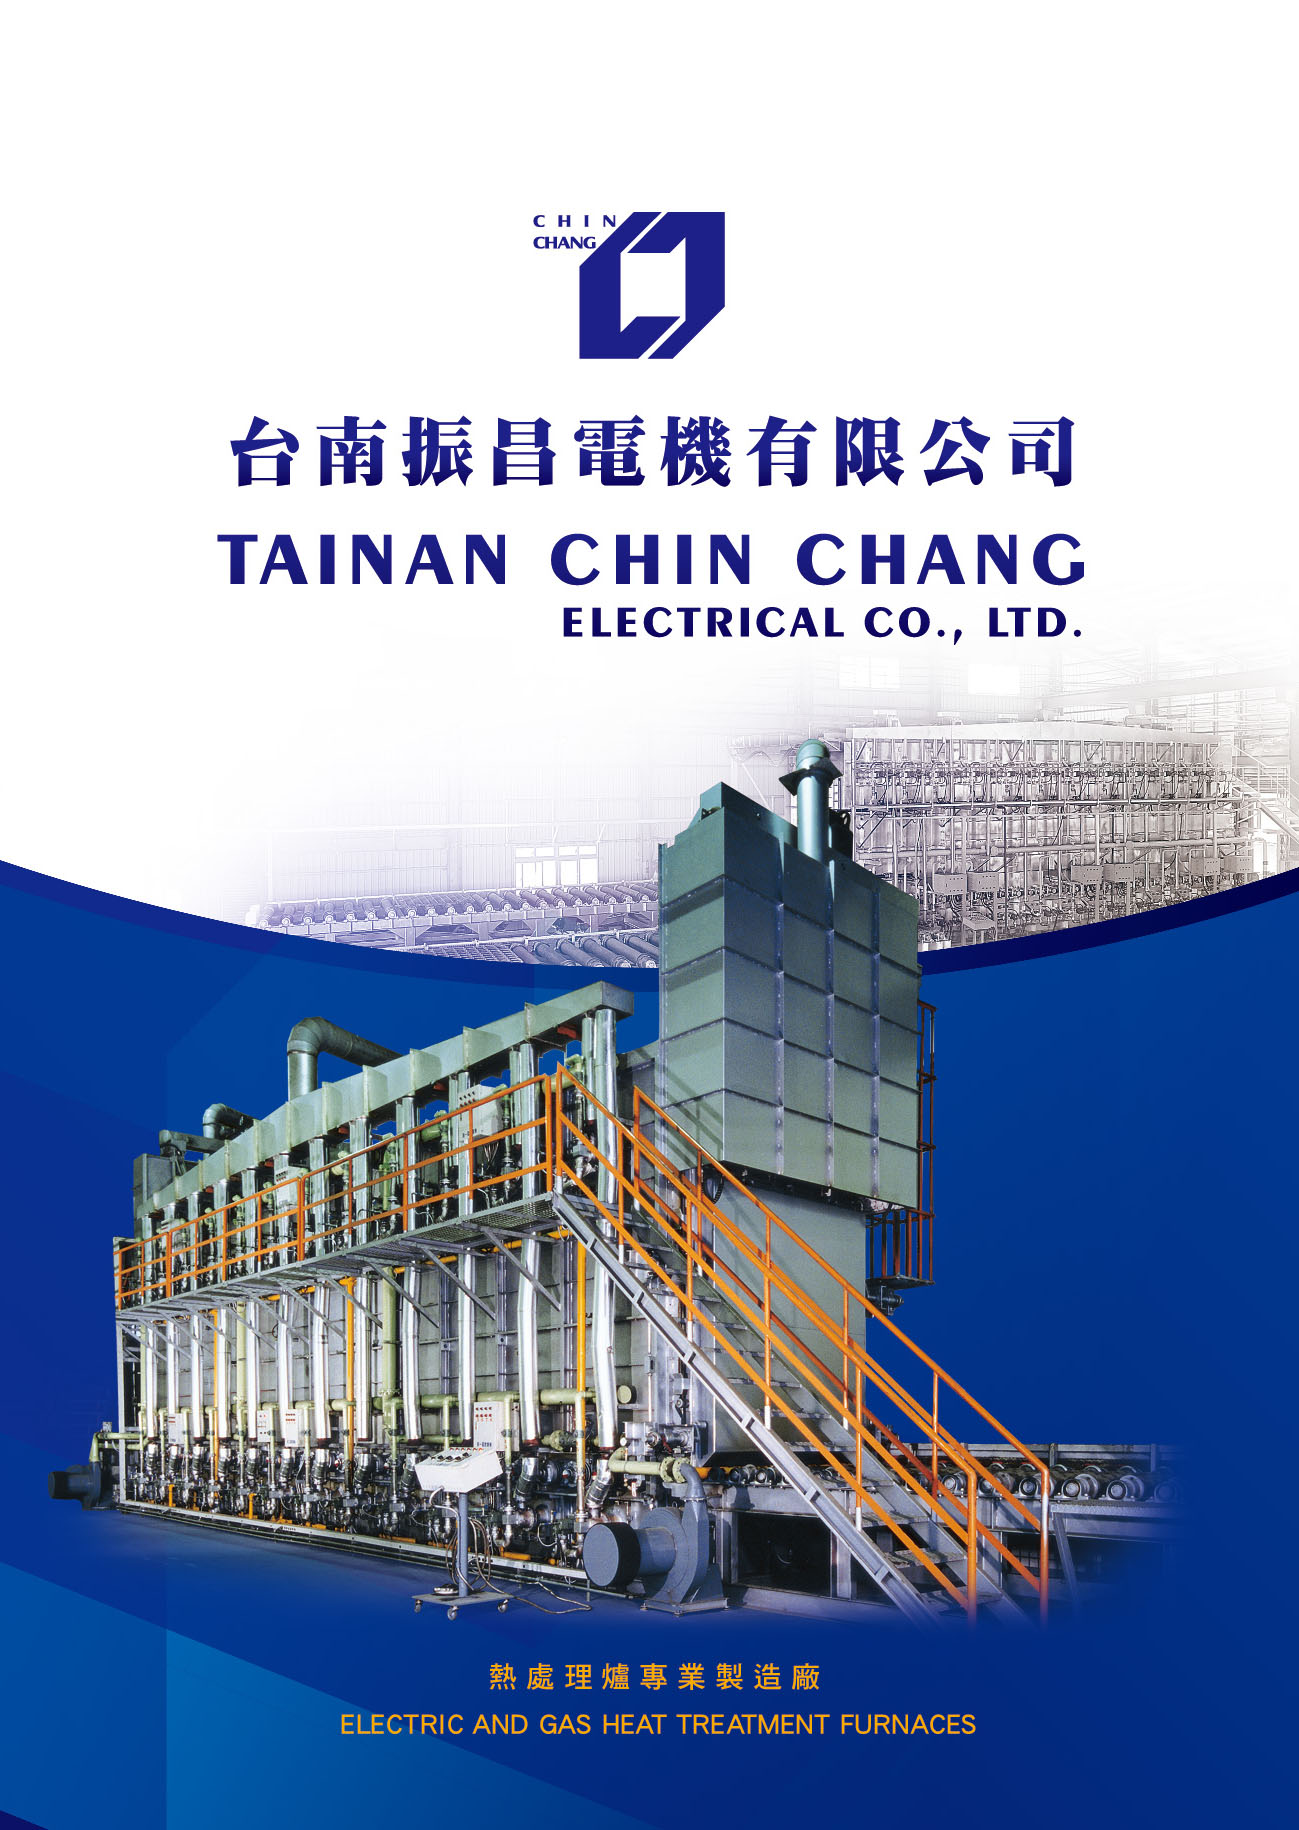 TAINAN CHIN CHANG ELECTRICAL CO., LTD.  Online Catalogues